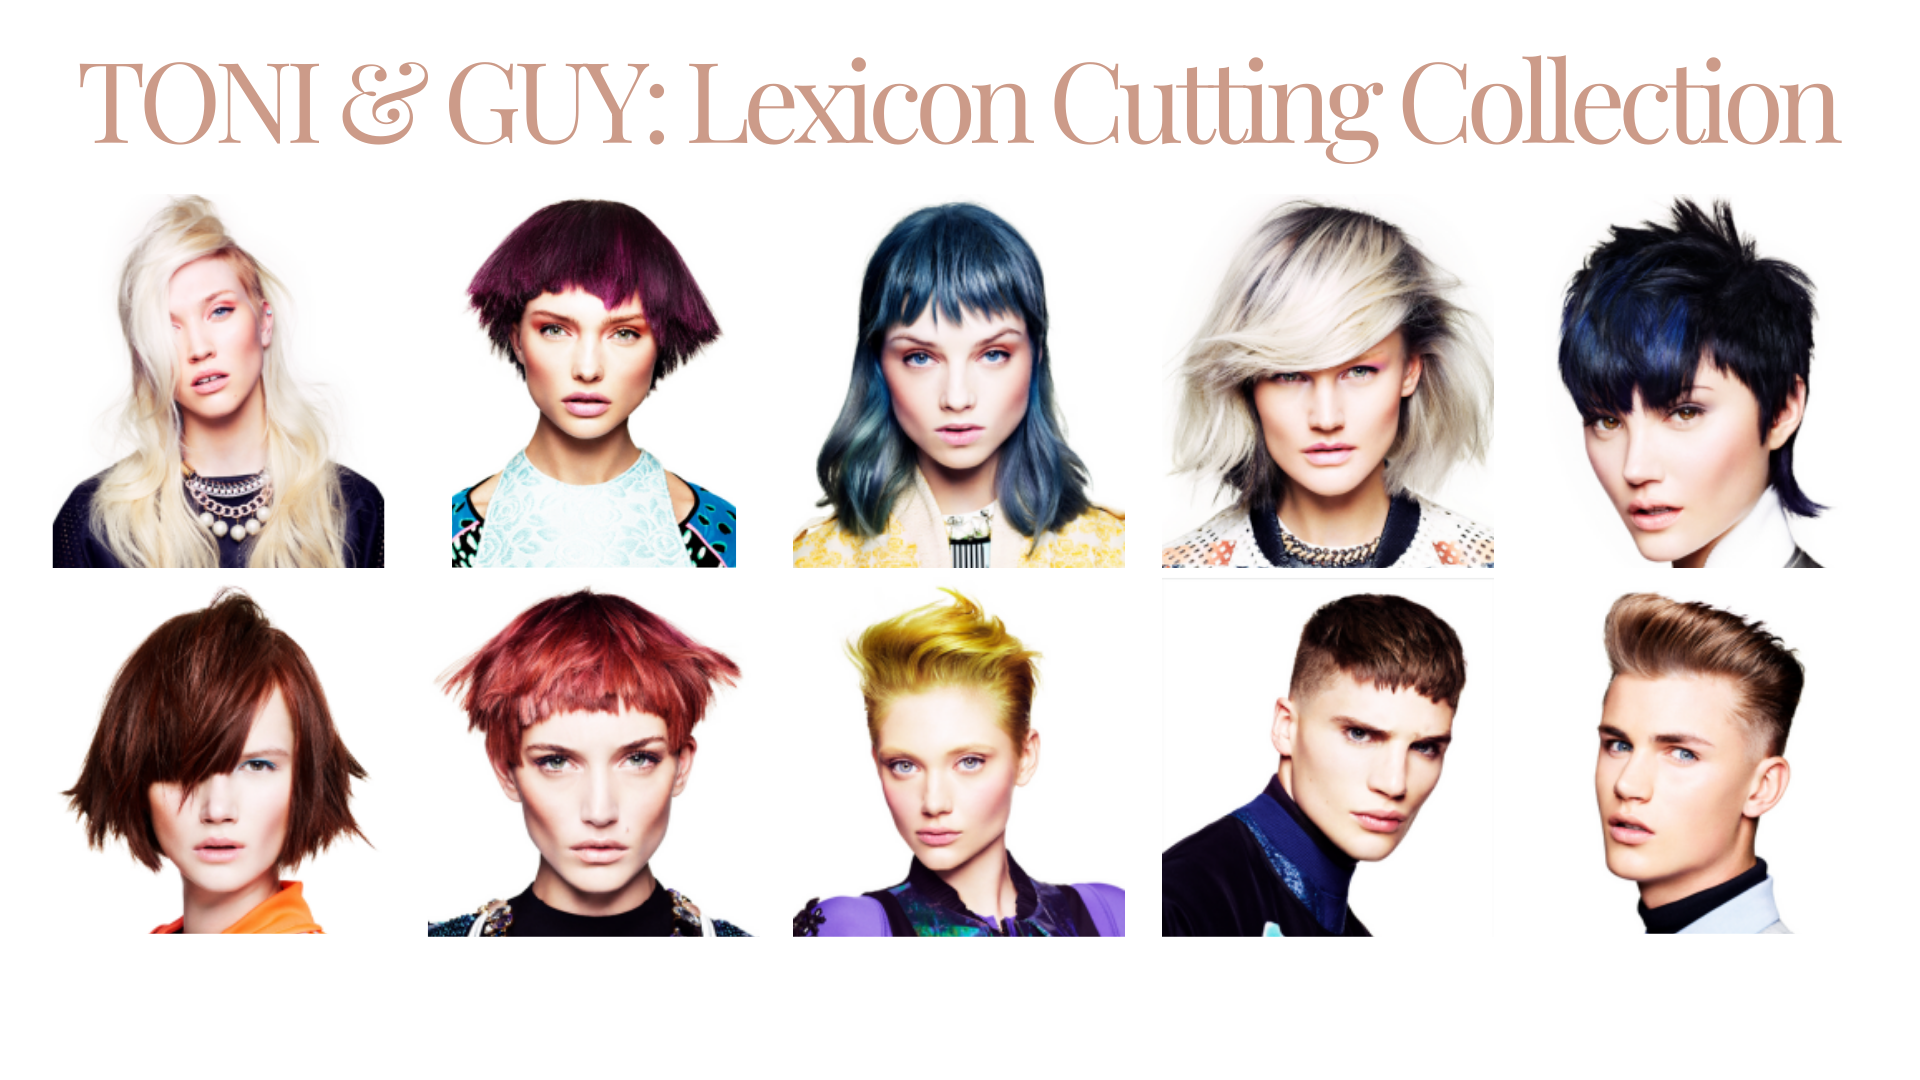 TONI&GUY: Lexicon Cutting Collection